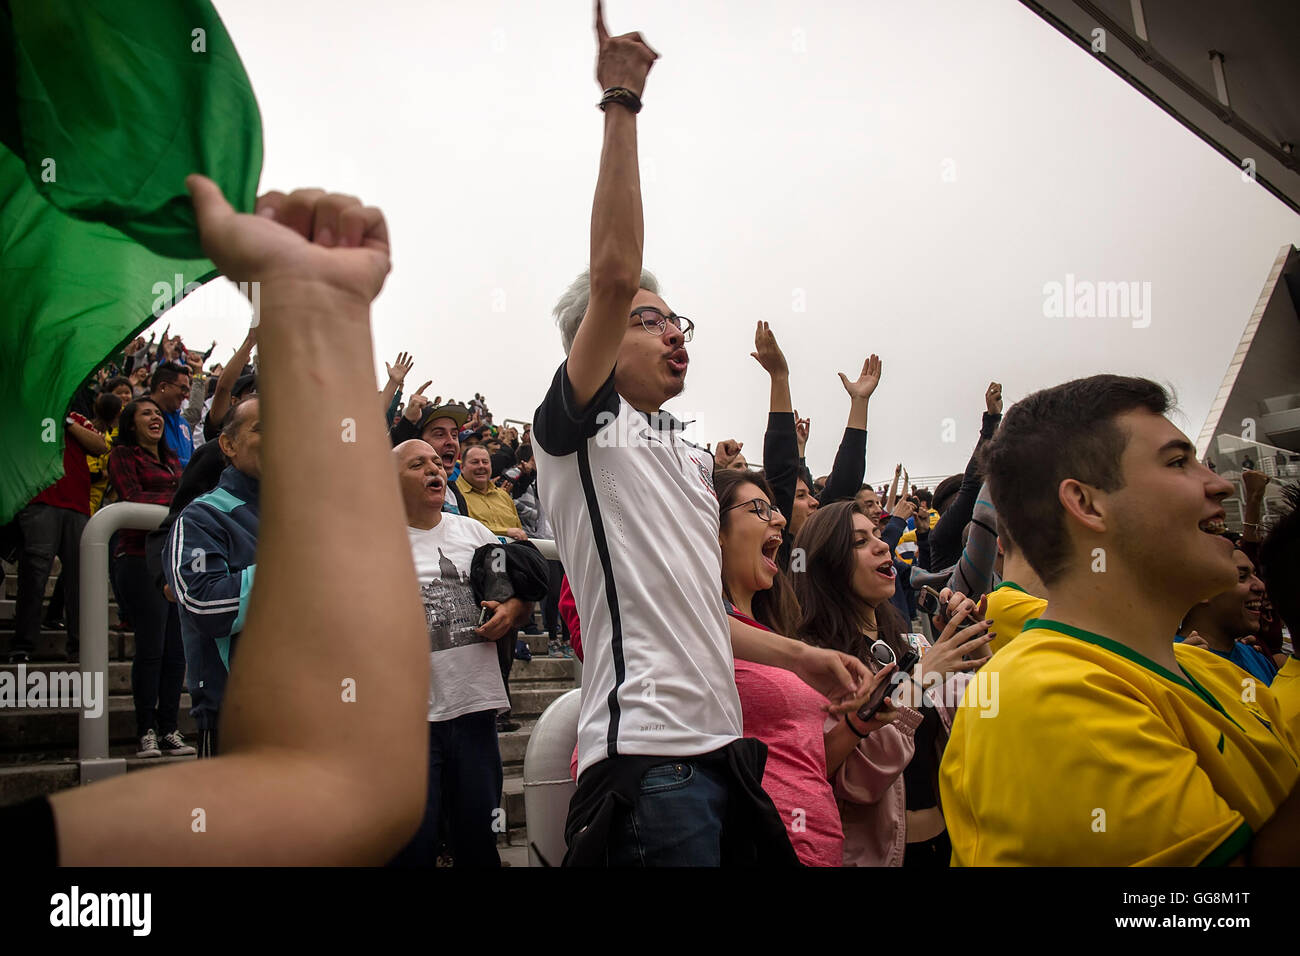 Sao Paulo, Brazil. 3 August 2016. Women's Soccer: Crowd celebrating Canada's women's soccer teams first goal that came just 19 seconds into the game at the Corinthians Arena the Rio 2016 Olympic Games in Sao Paulo, Brazil. Credit:  Samy St Clair /Alamy Live News Stock Photo